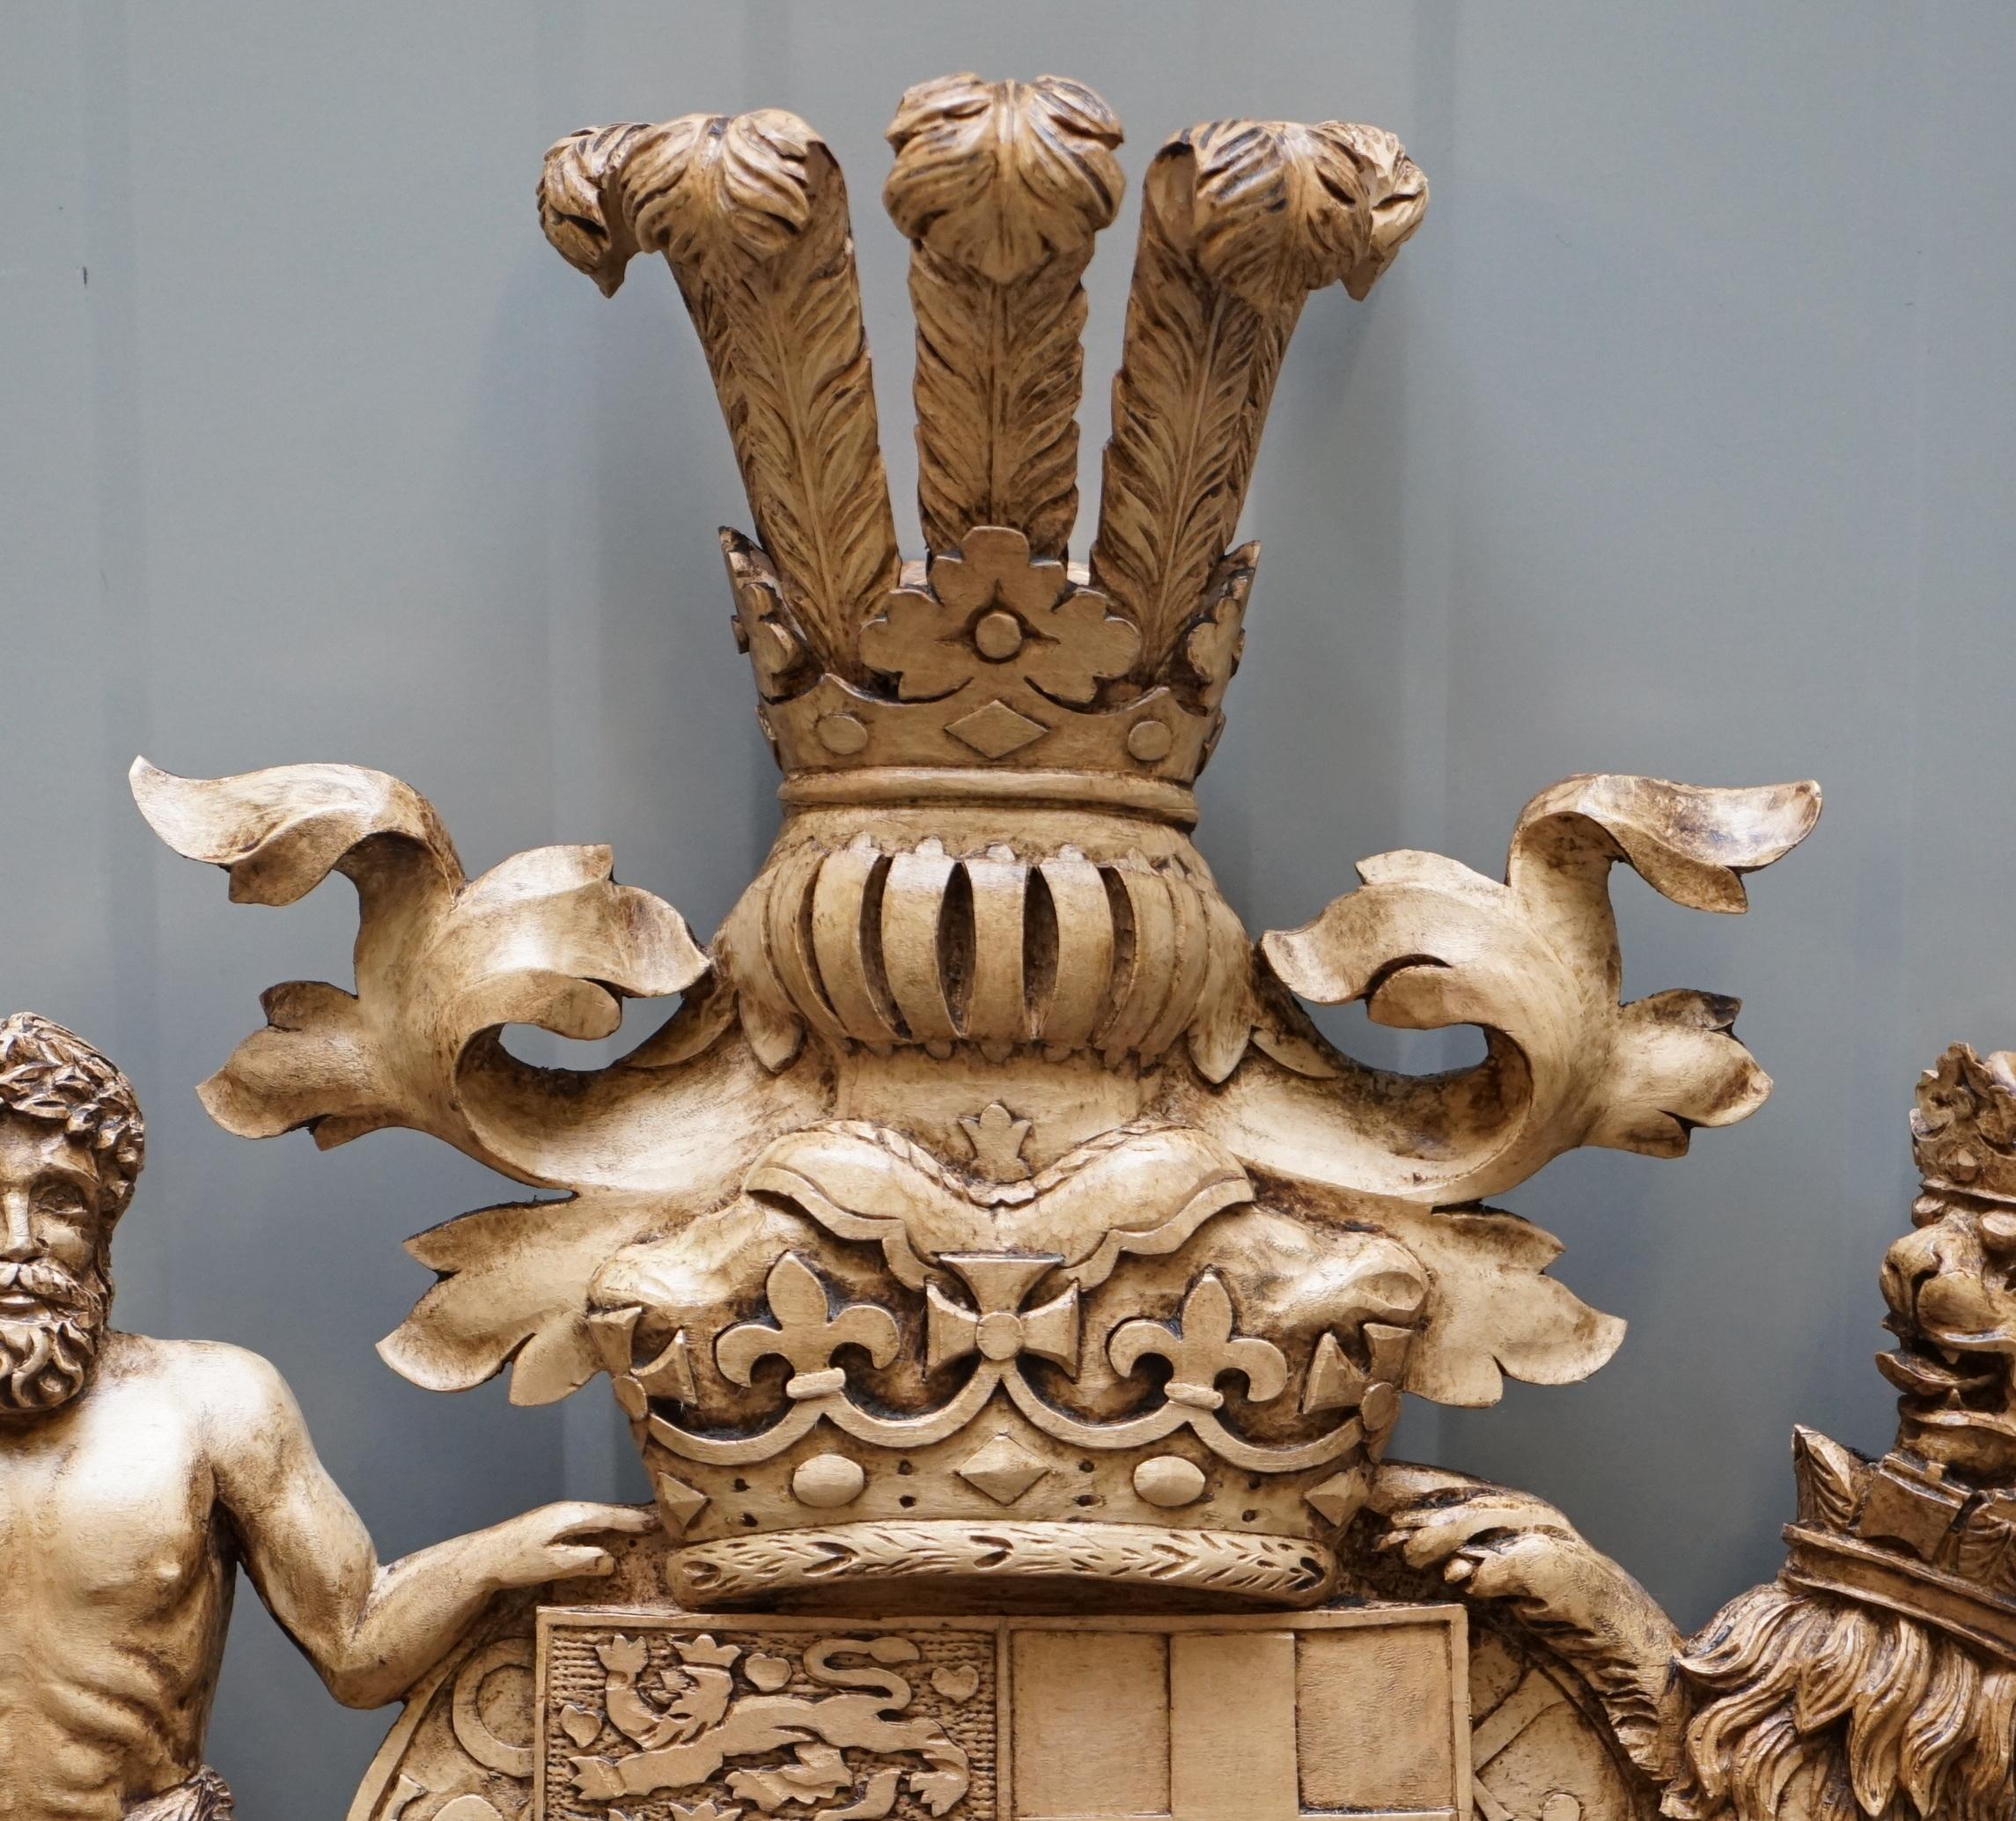 We are delighted to offer for sale this stunning hand carved from solid Limewood Price Phillips The Duke of York coat of arms

A truly stunning piece of art, its hand carved as mentioned from solid lime wood and clearly executed by a master